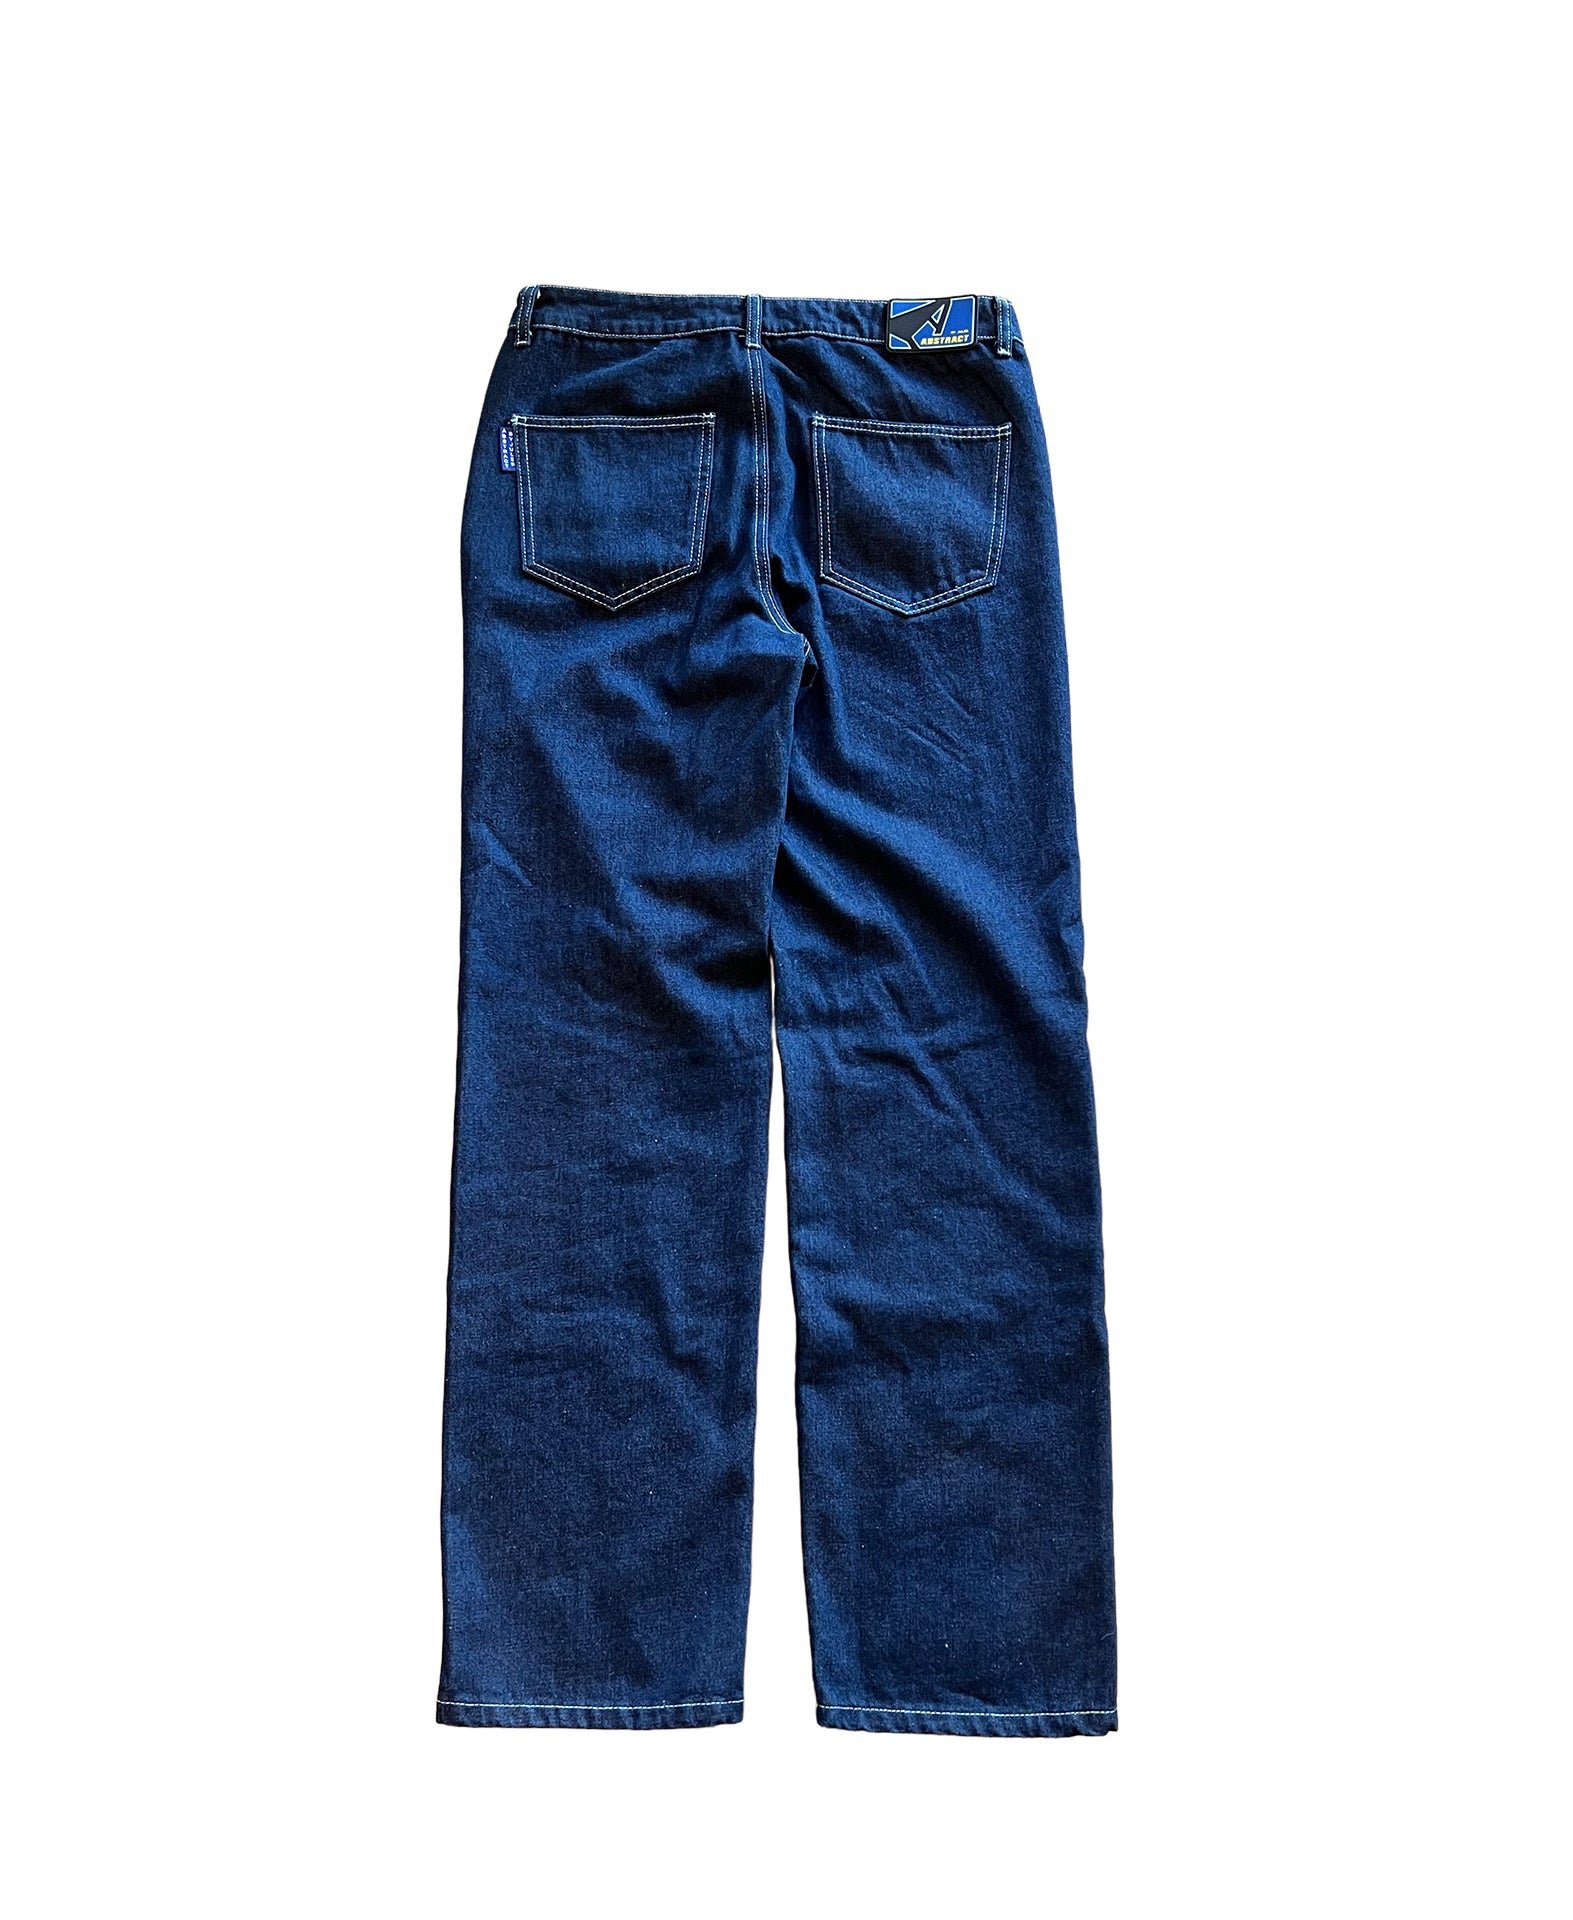 Thorn jeans - Navy